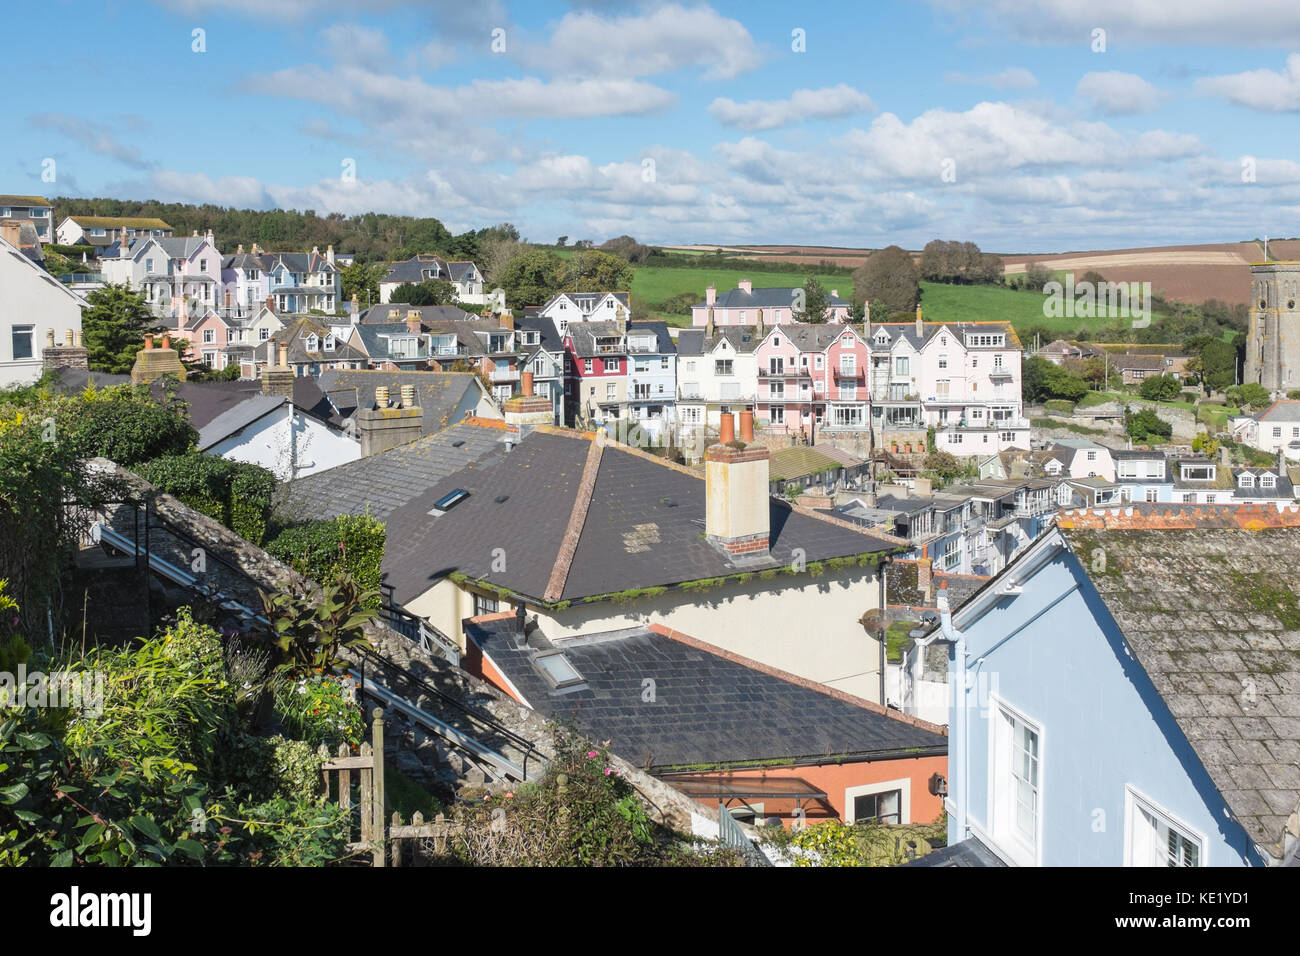 View overlooking rooftops and colourful houses in the popular Devon town of Salcombe Stock Photo